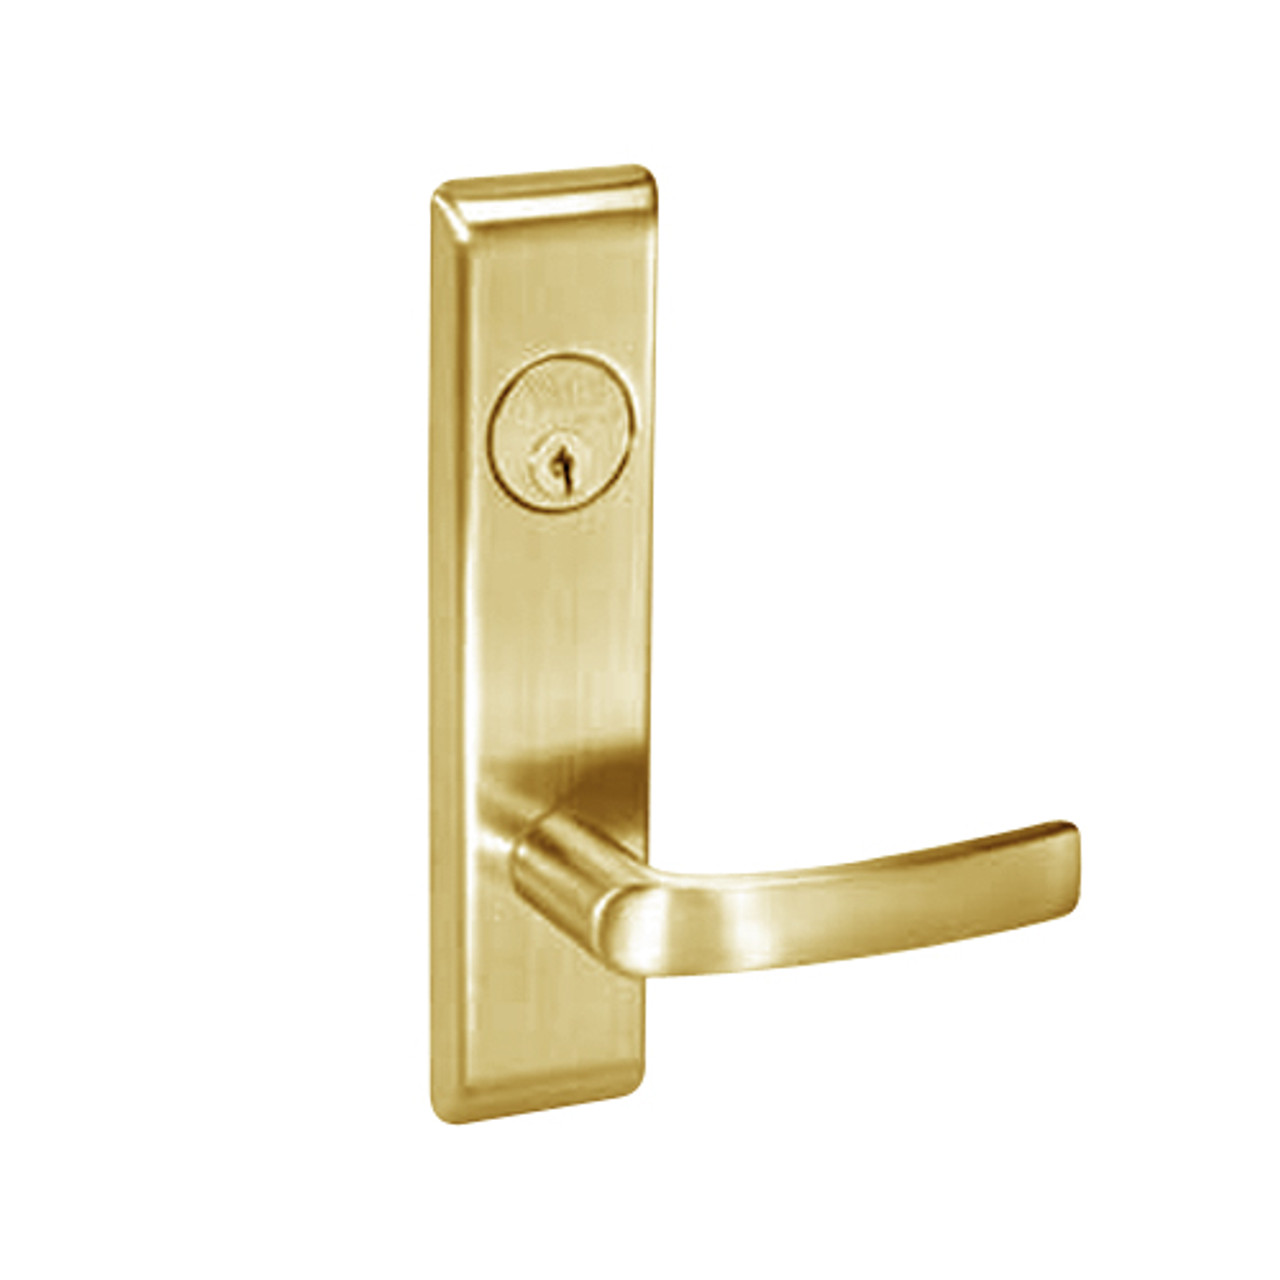 MOCN8860FL-606 Yale 8800FL Series Single Cylinder with Deadbolt Mortise Entrance or Storeroom Lock with Indicator with Monroe Lever in Satin Brass